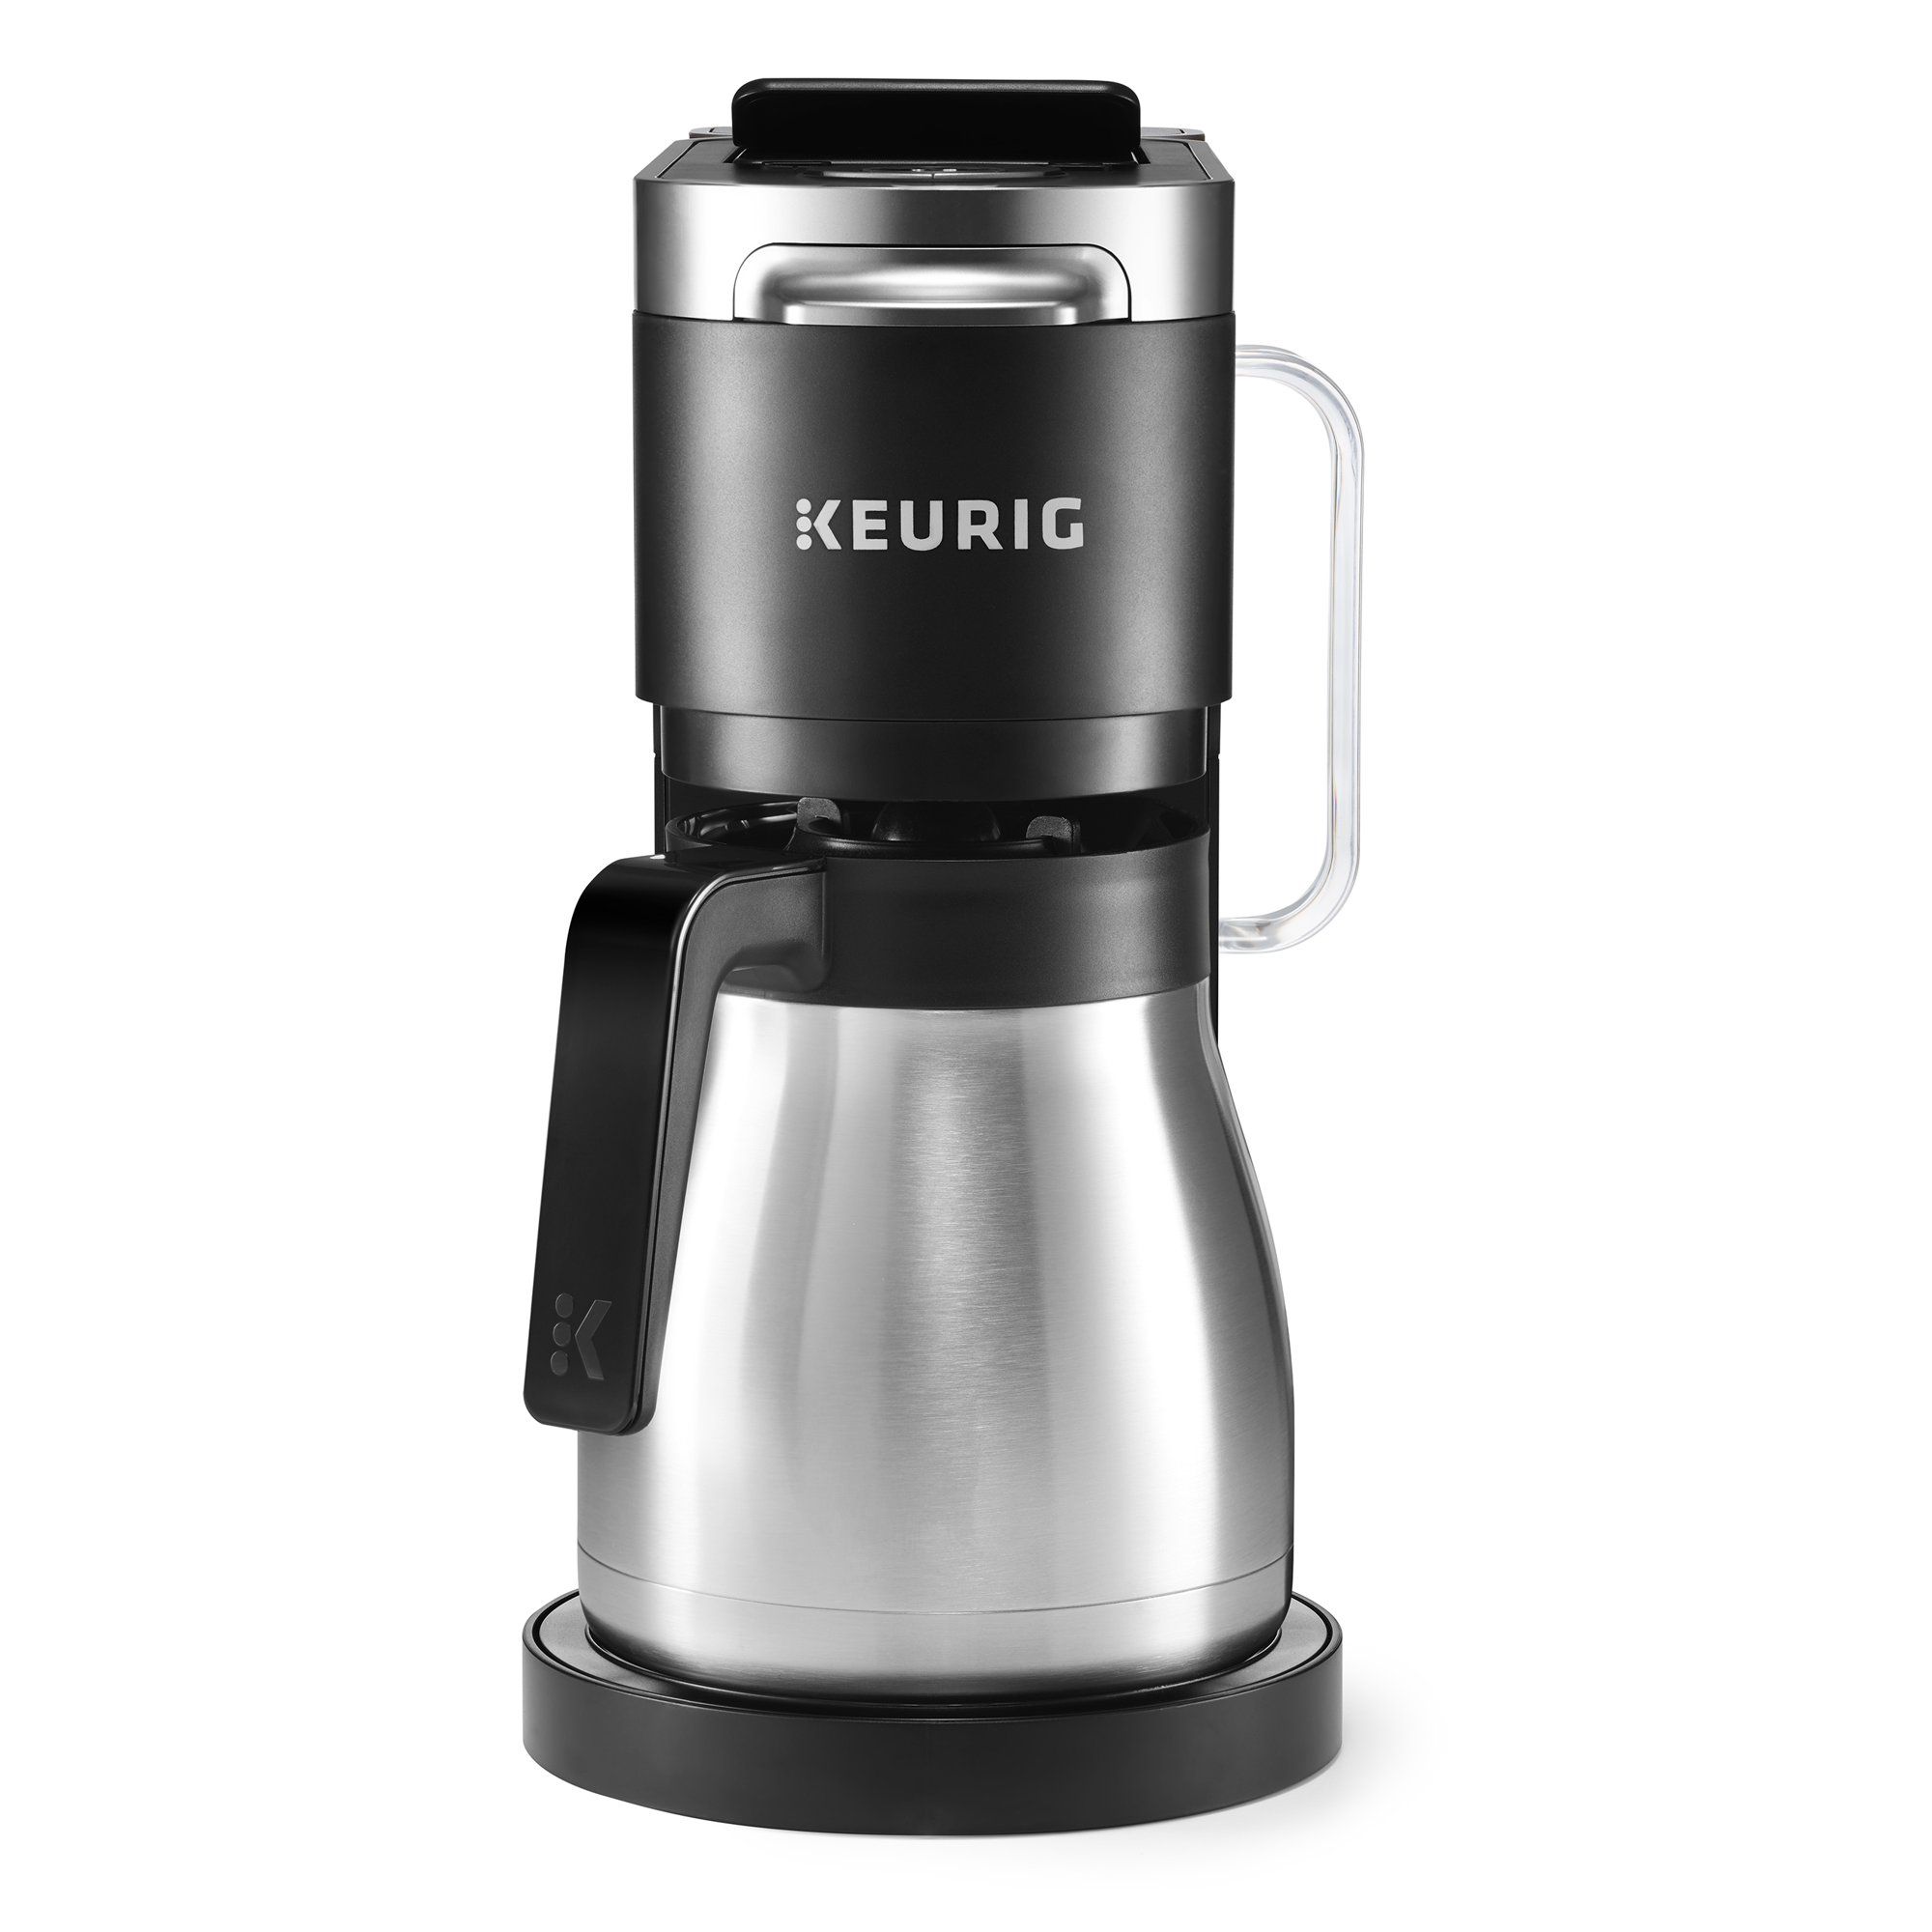 Keurig K-Duo Plus Coffee Maker, with Single Serve K-Cup Pod and 12 Cup Carafe Brewer, Black | Walmart (US)